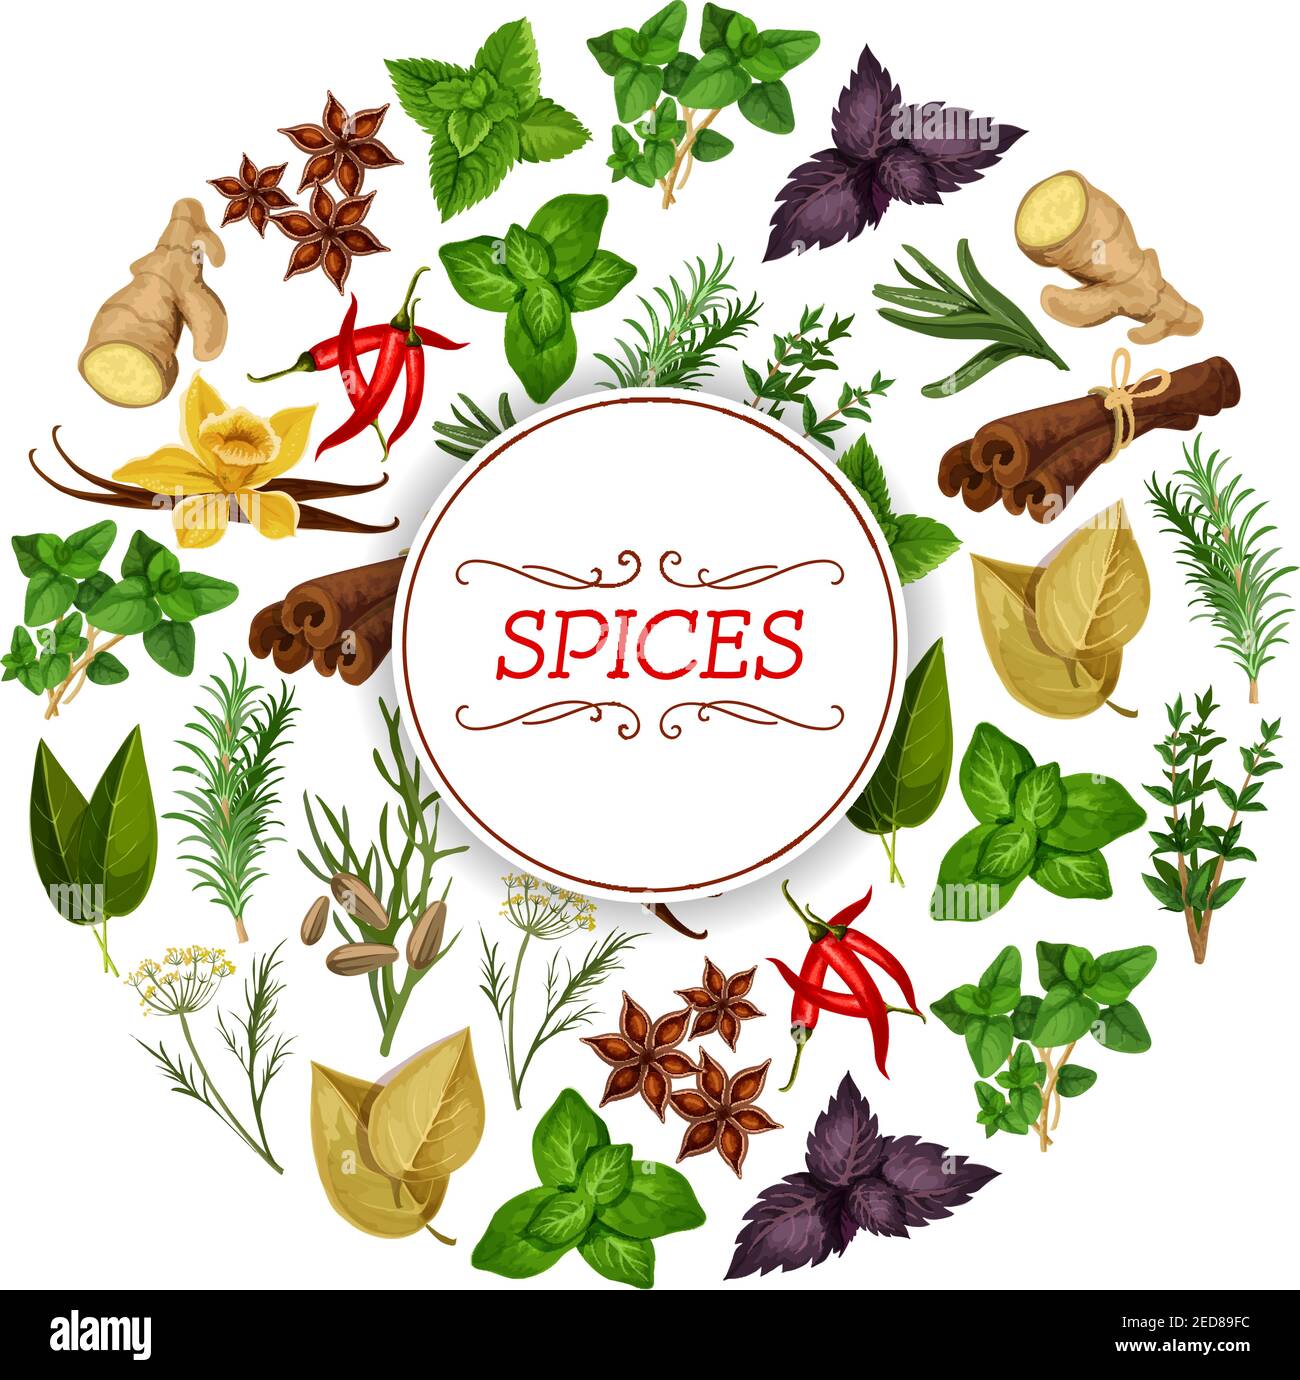 Spice food or seasoning, herb banner. Vanilla and cinnamon, flat-leaved rosemary and star anise, red chili pepper and mint, peppermint or spearmint, g Stock Vector